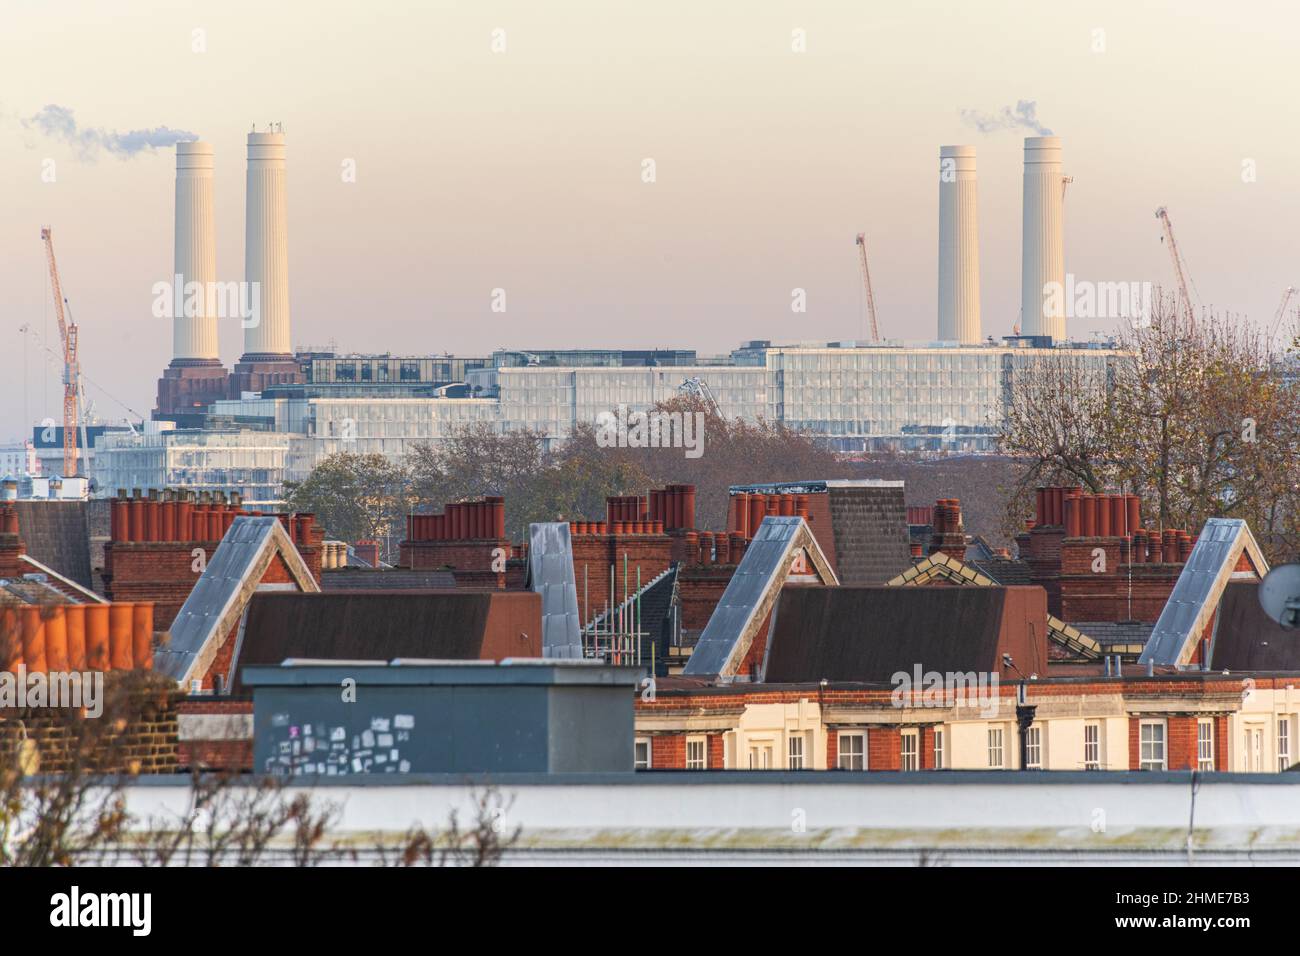 Steam rising from Rebuilt Chimneys of The Battersea Power Station Development. London. Photographed from Chelsea. Stock Photo